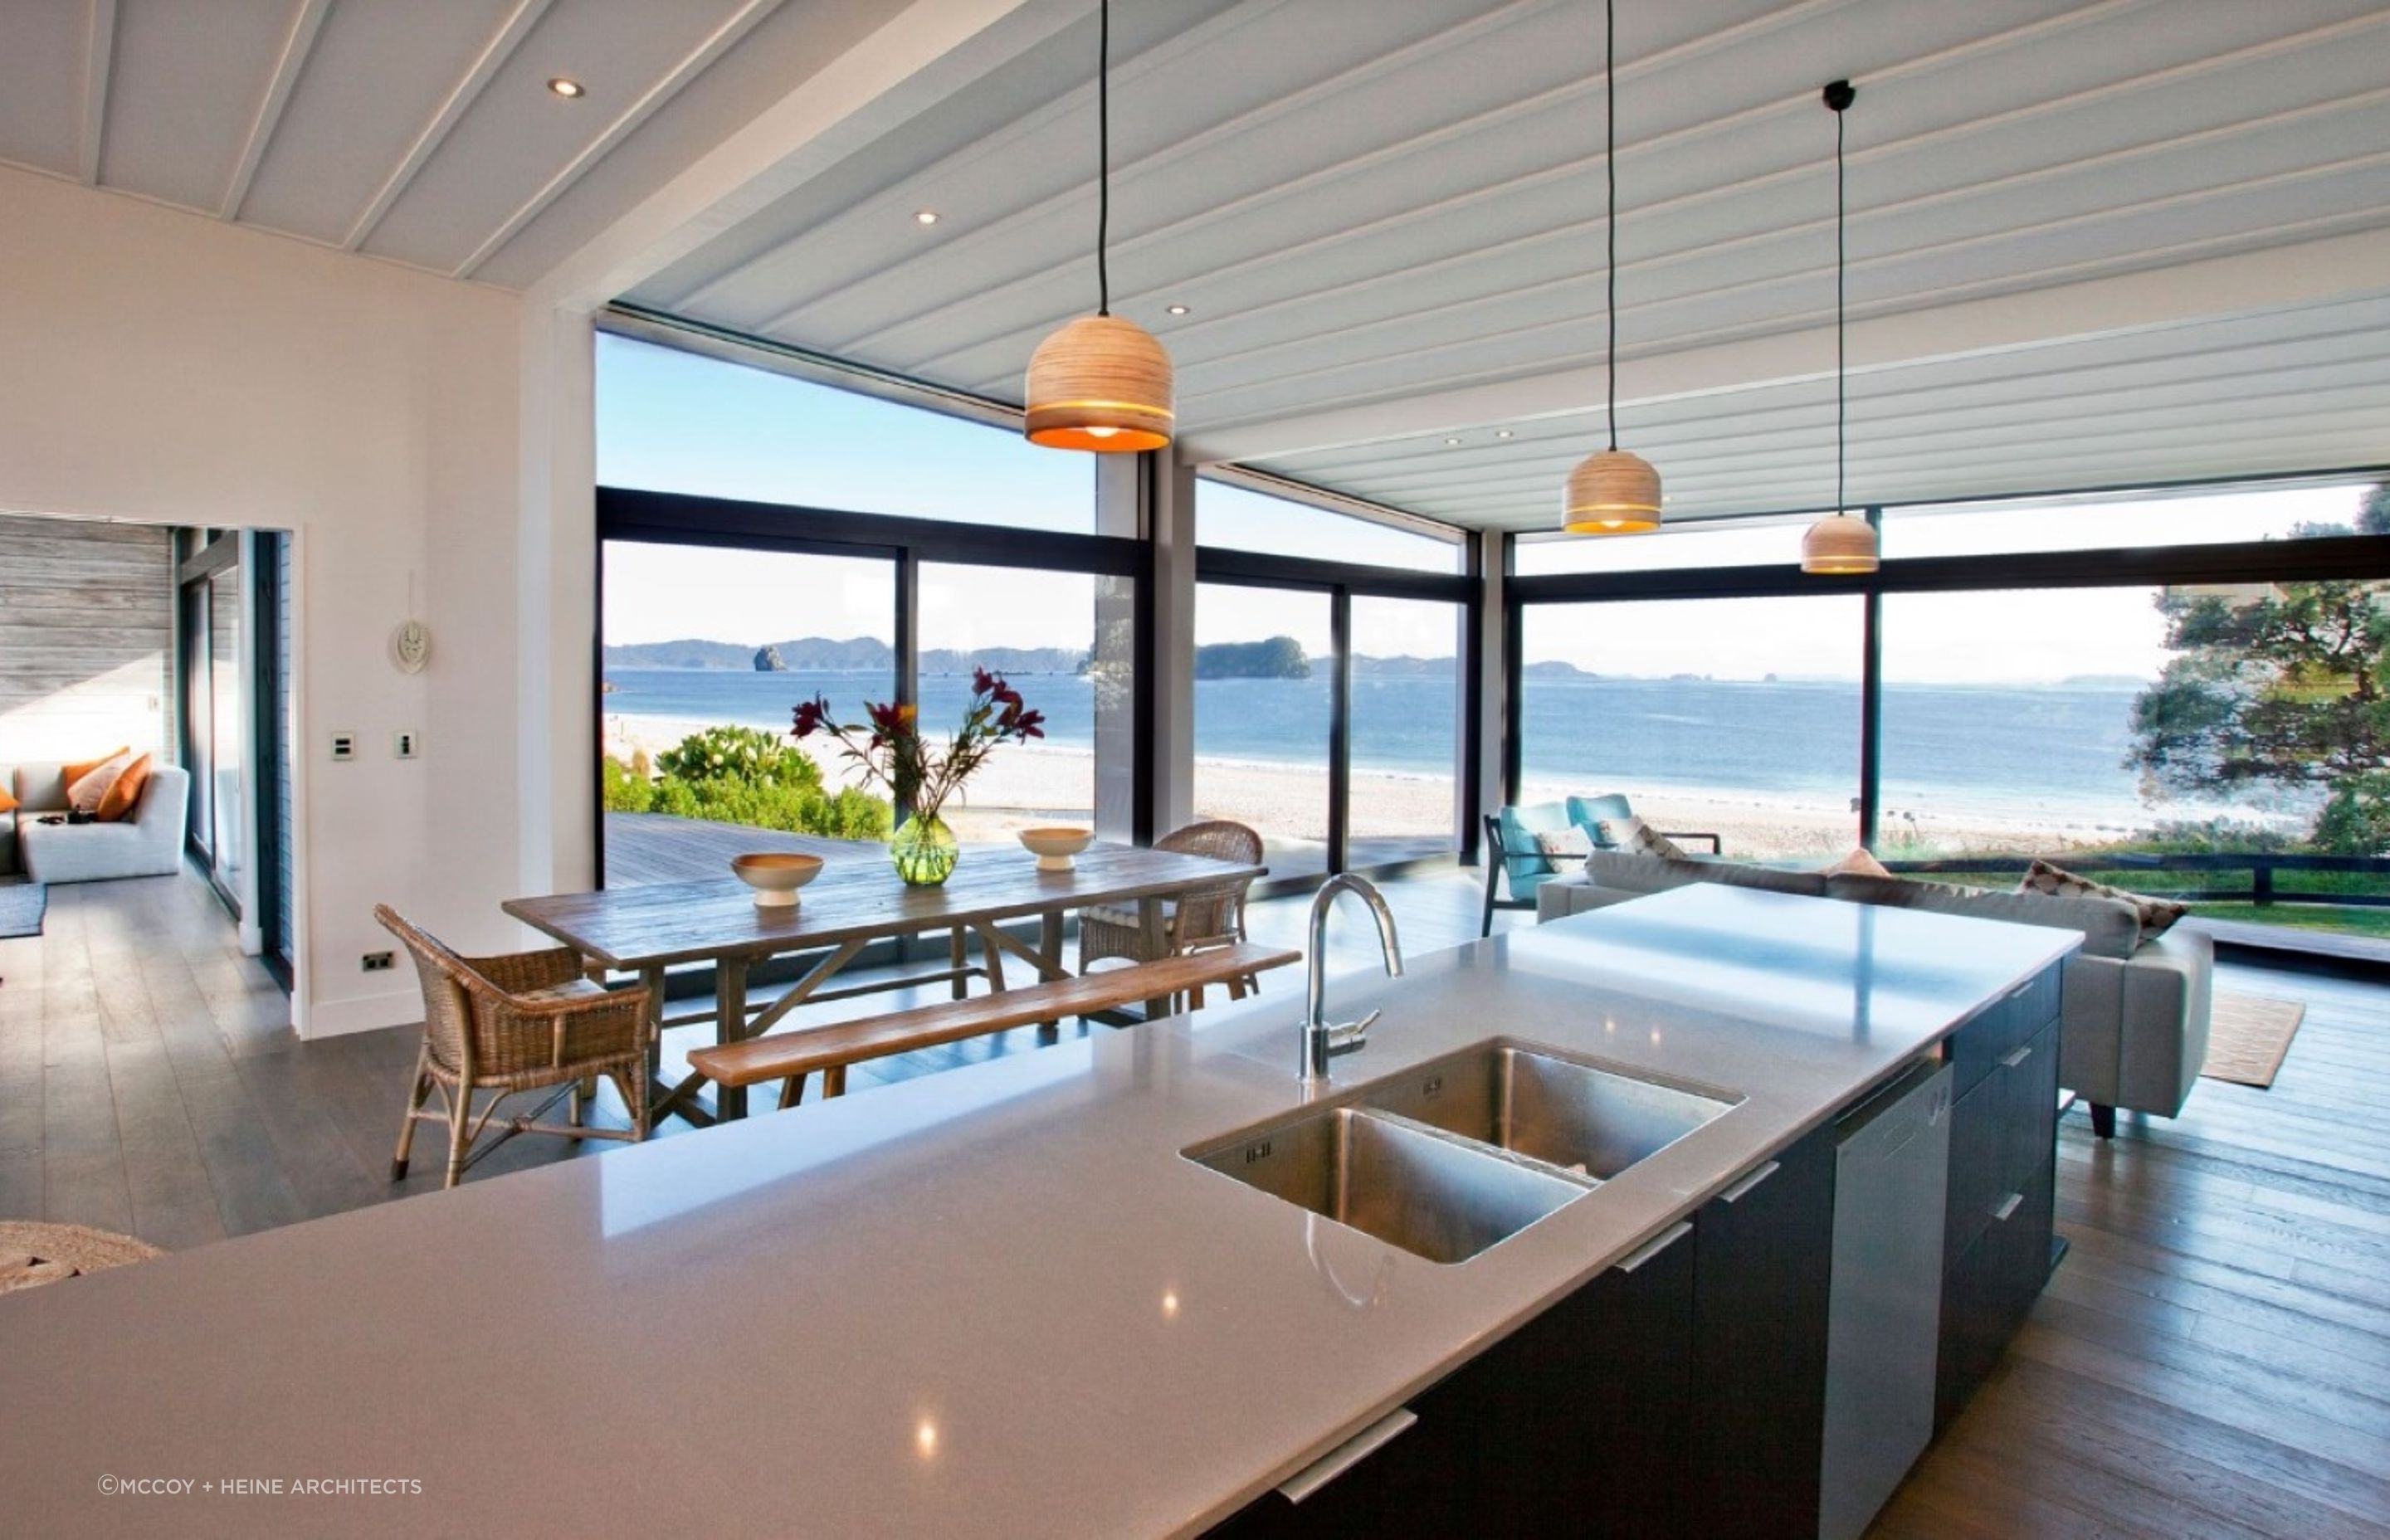 The beachfront views can be fully appreciated from inside the home.